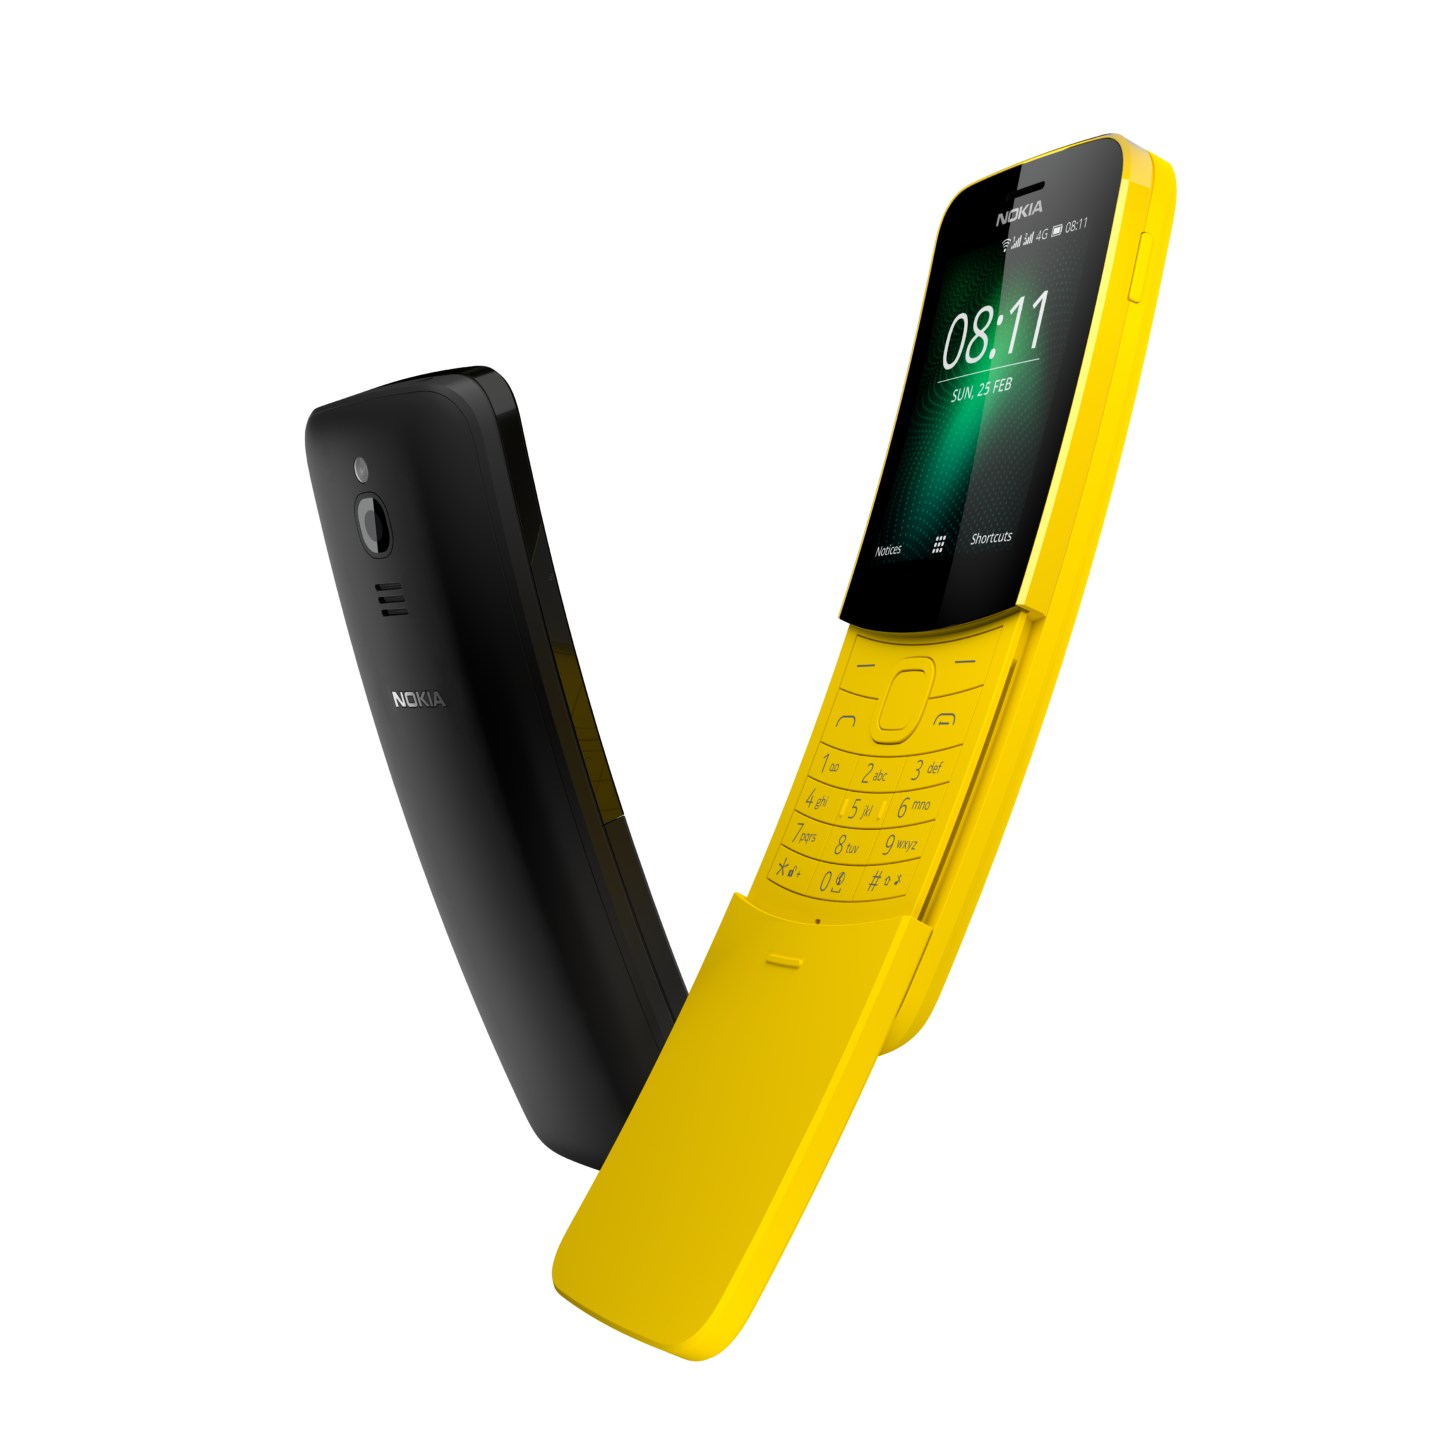 Nokia brings back the 8110 banana phone that appeared in The Matrix